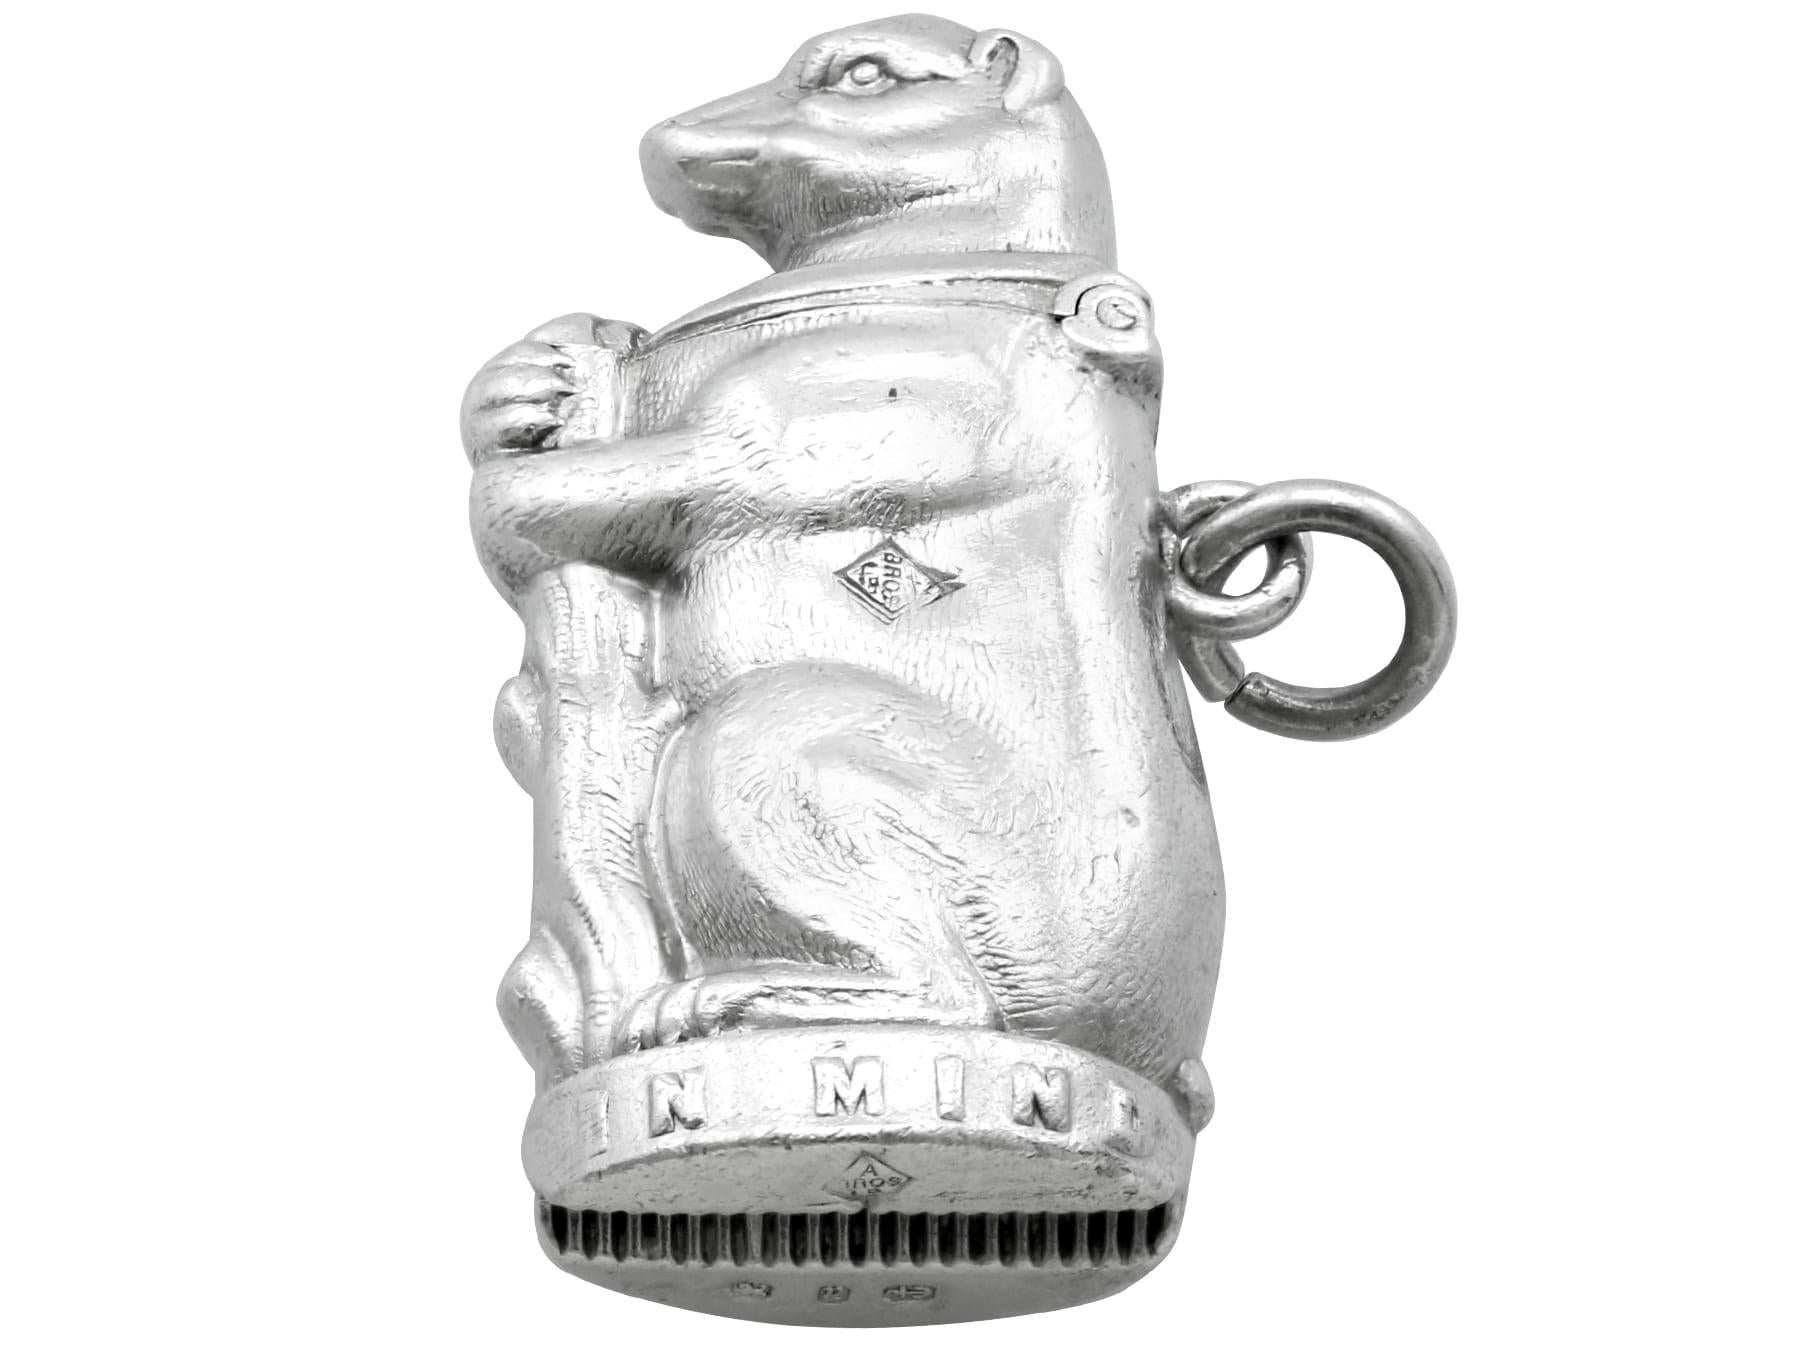 An exceptional, fine and impressive, rare antique Victorian English sterling silver vesta case modelled in the form of the Bear and Ragged Staff; an addition to our ornamental silverware collection

This exceptional and rare antique Victorian